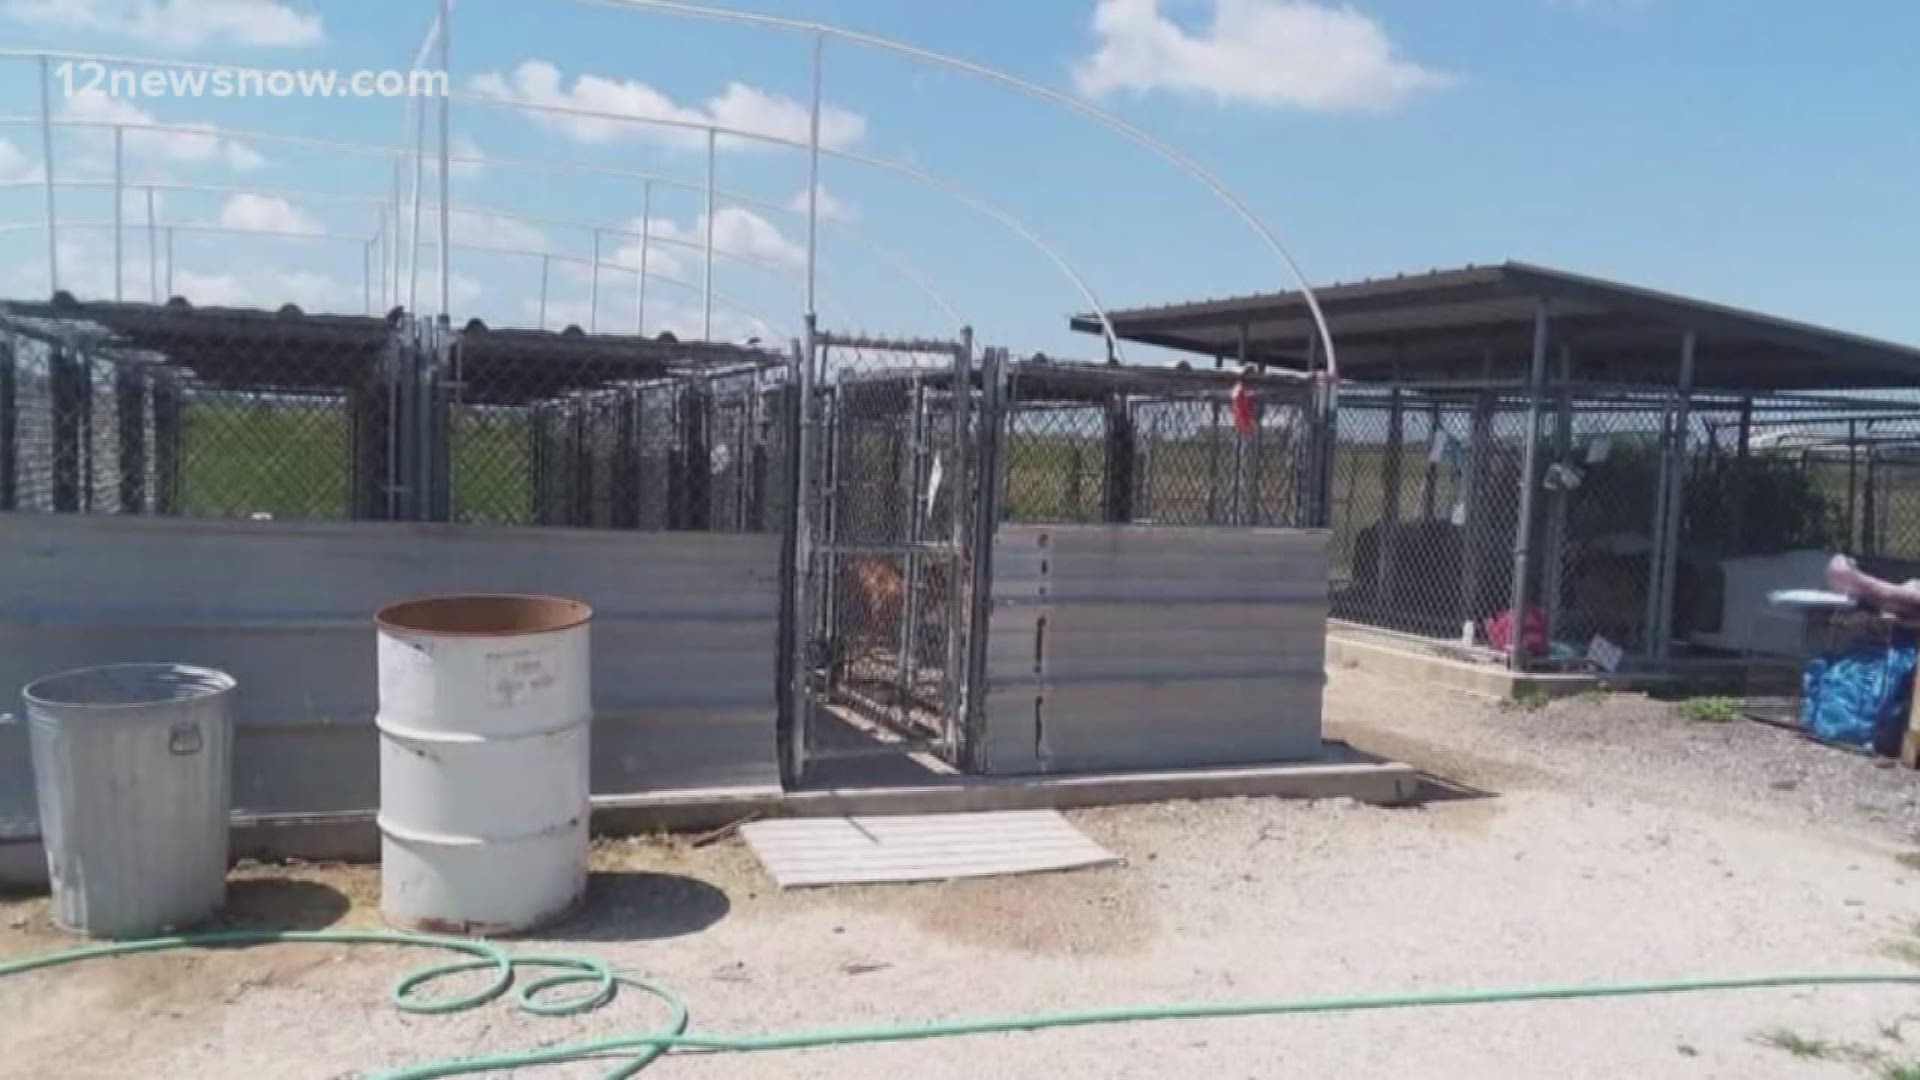 A new shelter was approved back in 2018 but the animals at the shelter in Chambers County are still in temporary kennels.